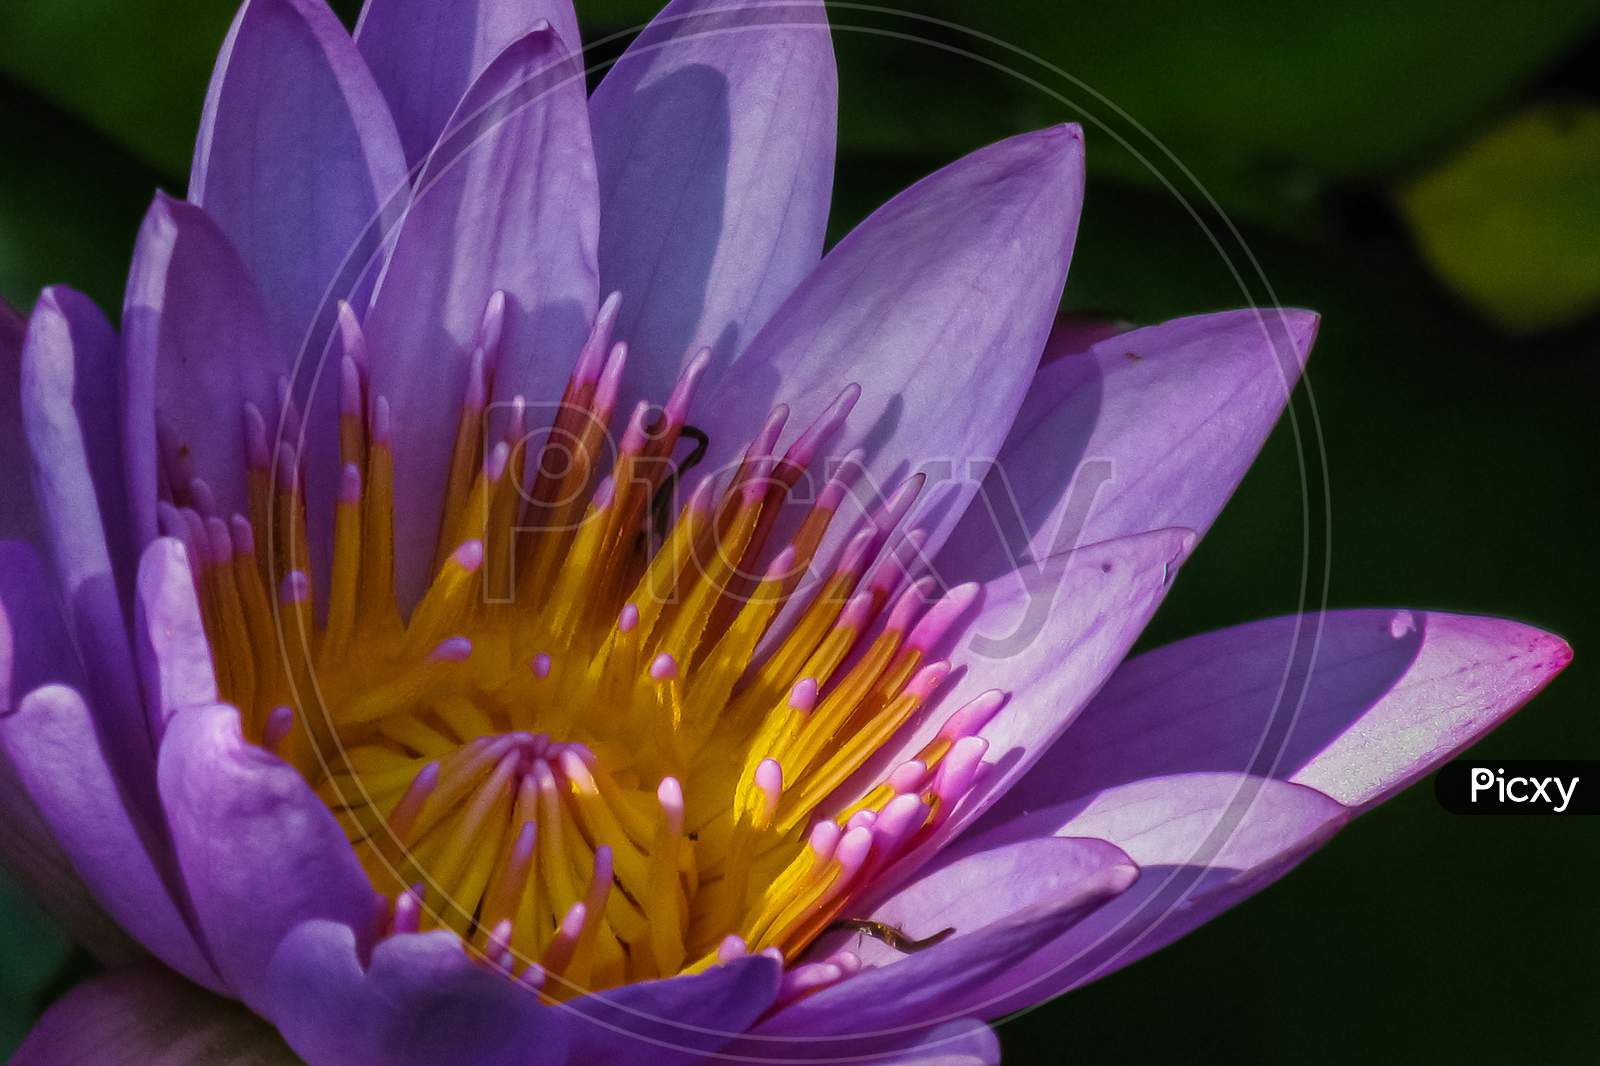 A water Lilly on water with green leaves and dark background